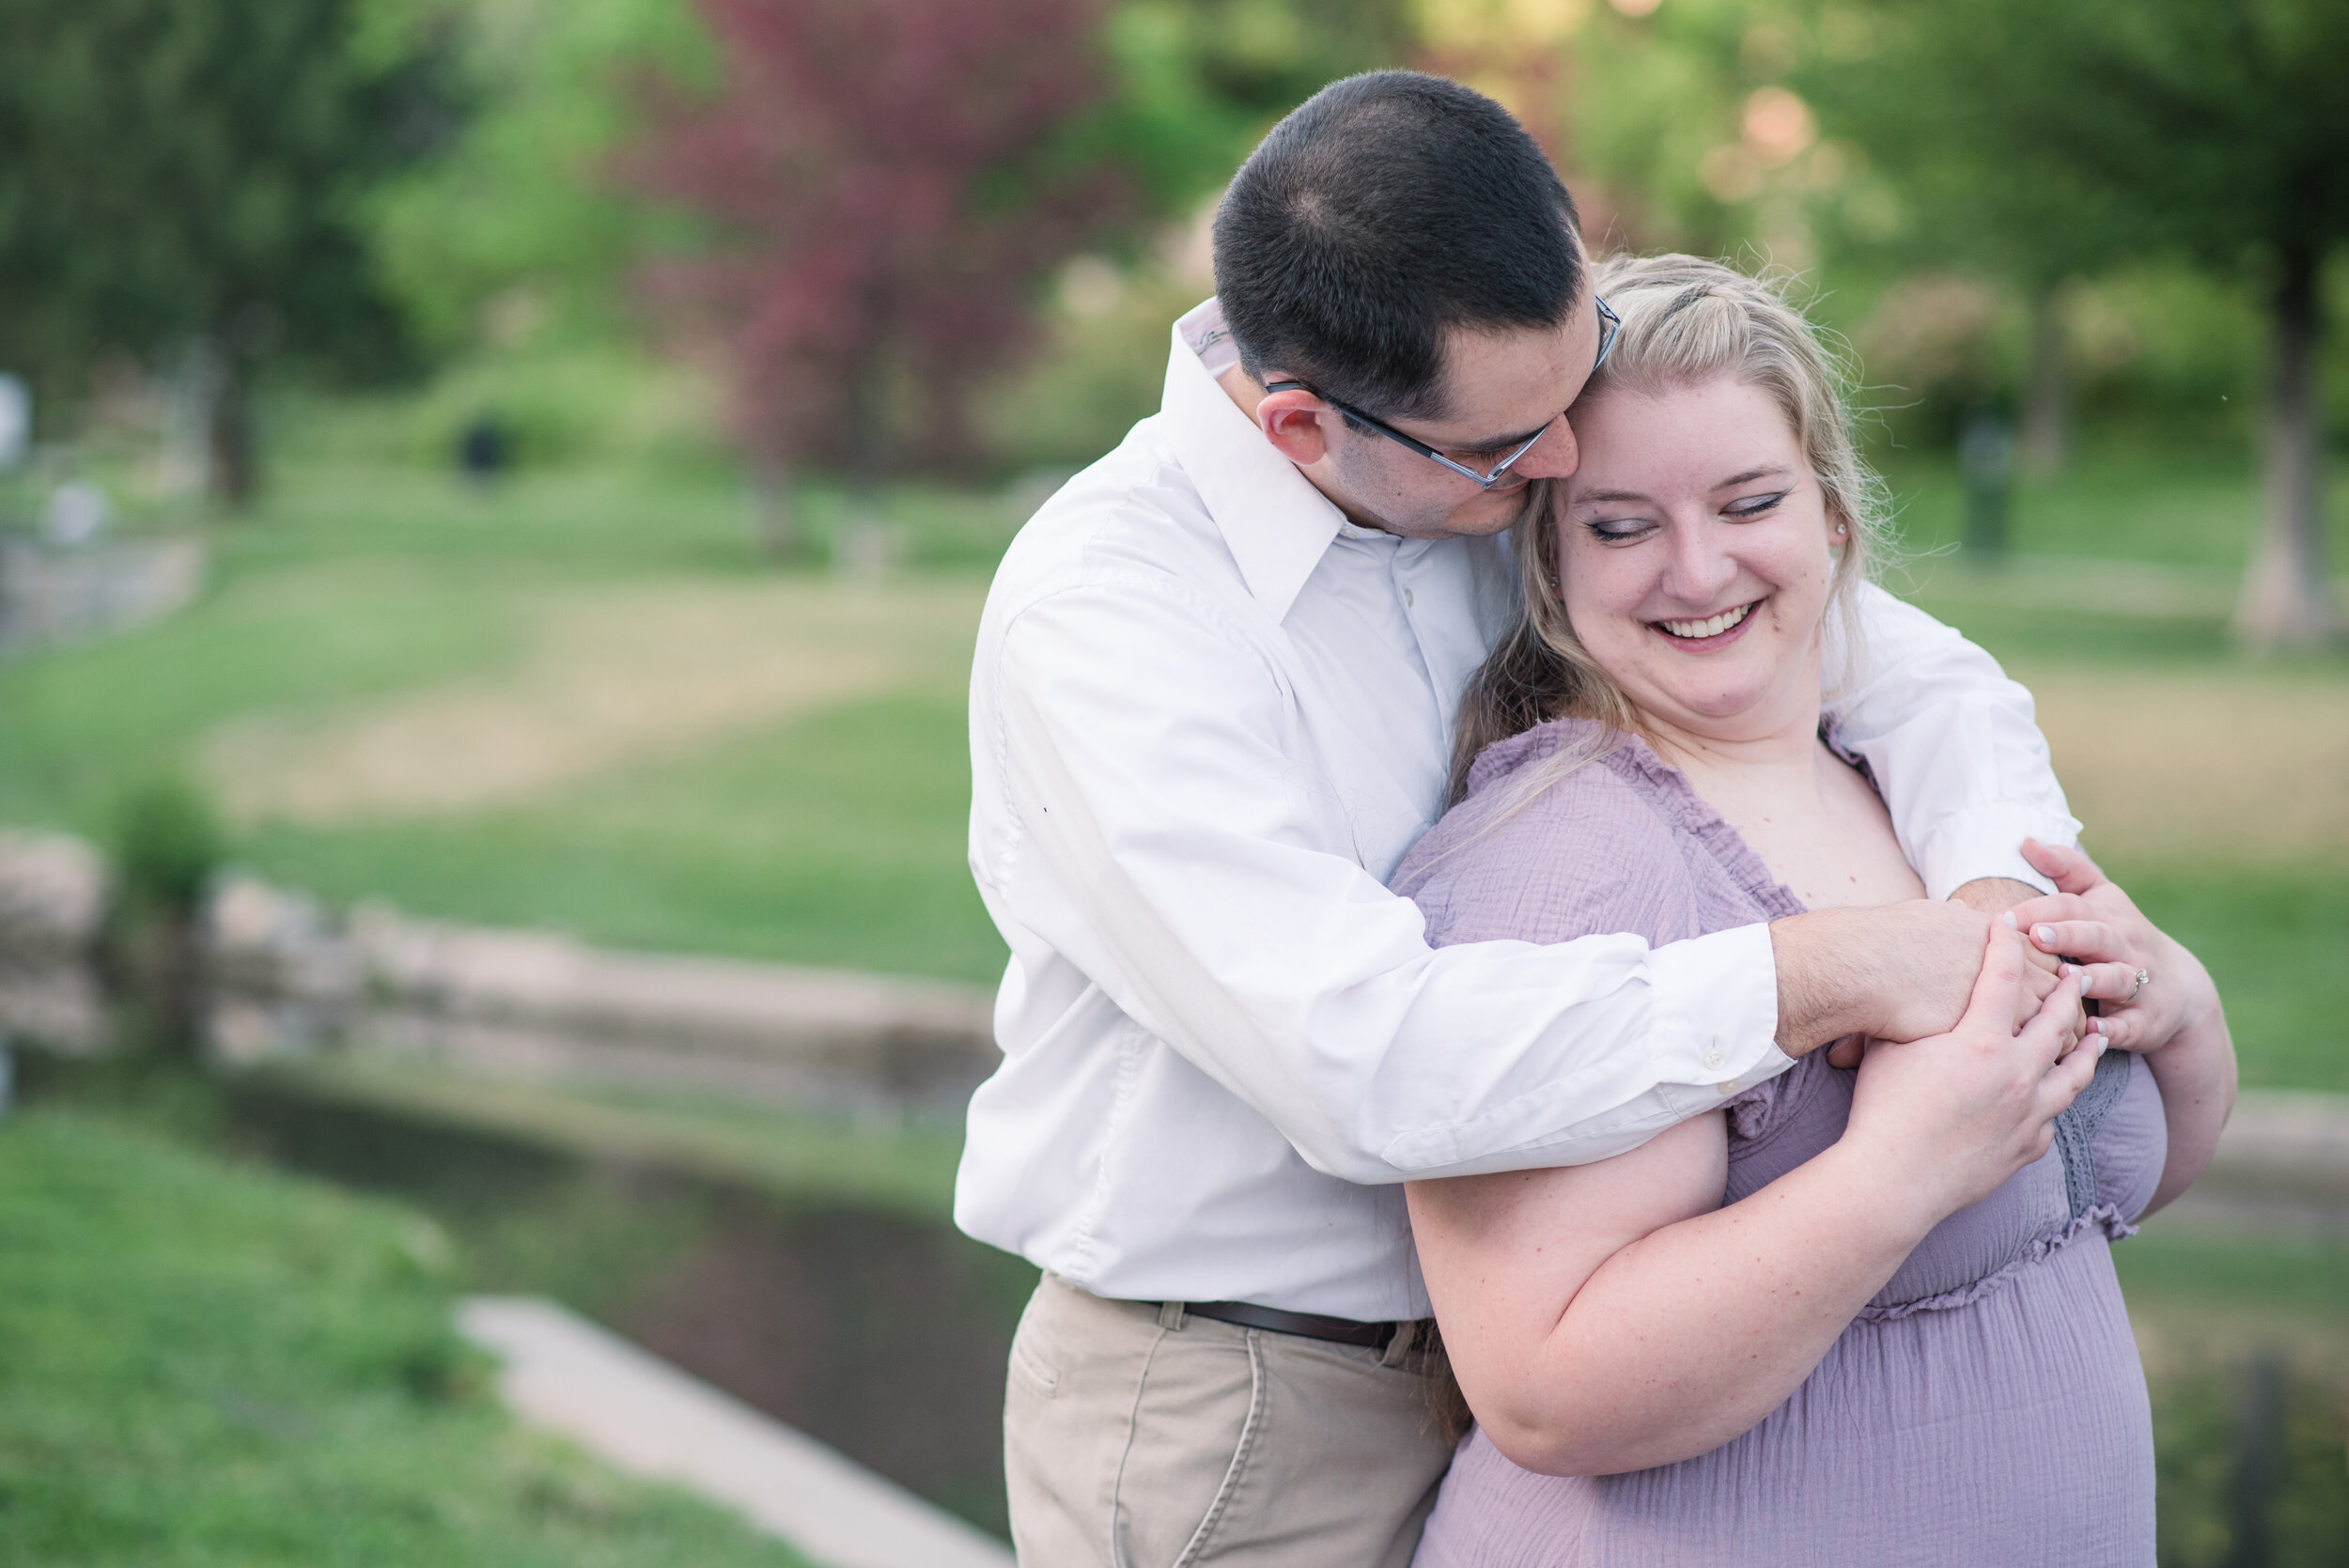 Utah_Wedding_Photographer_Engagement_Portraits_Cathedral_of_the_Madeline_Memory_Grove_Park 10.jpg